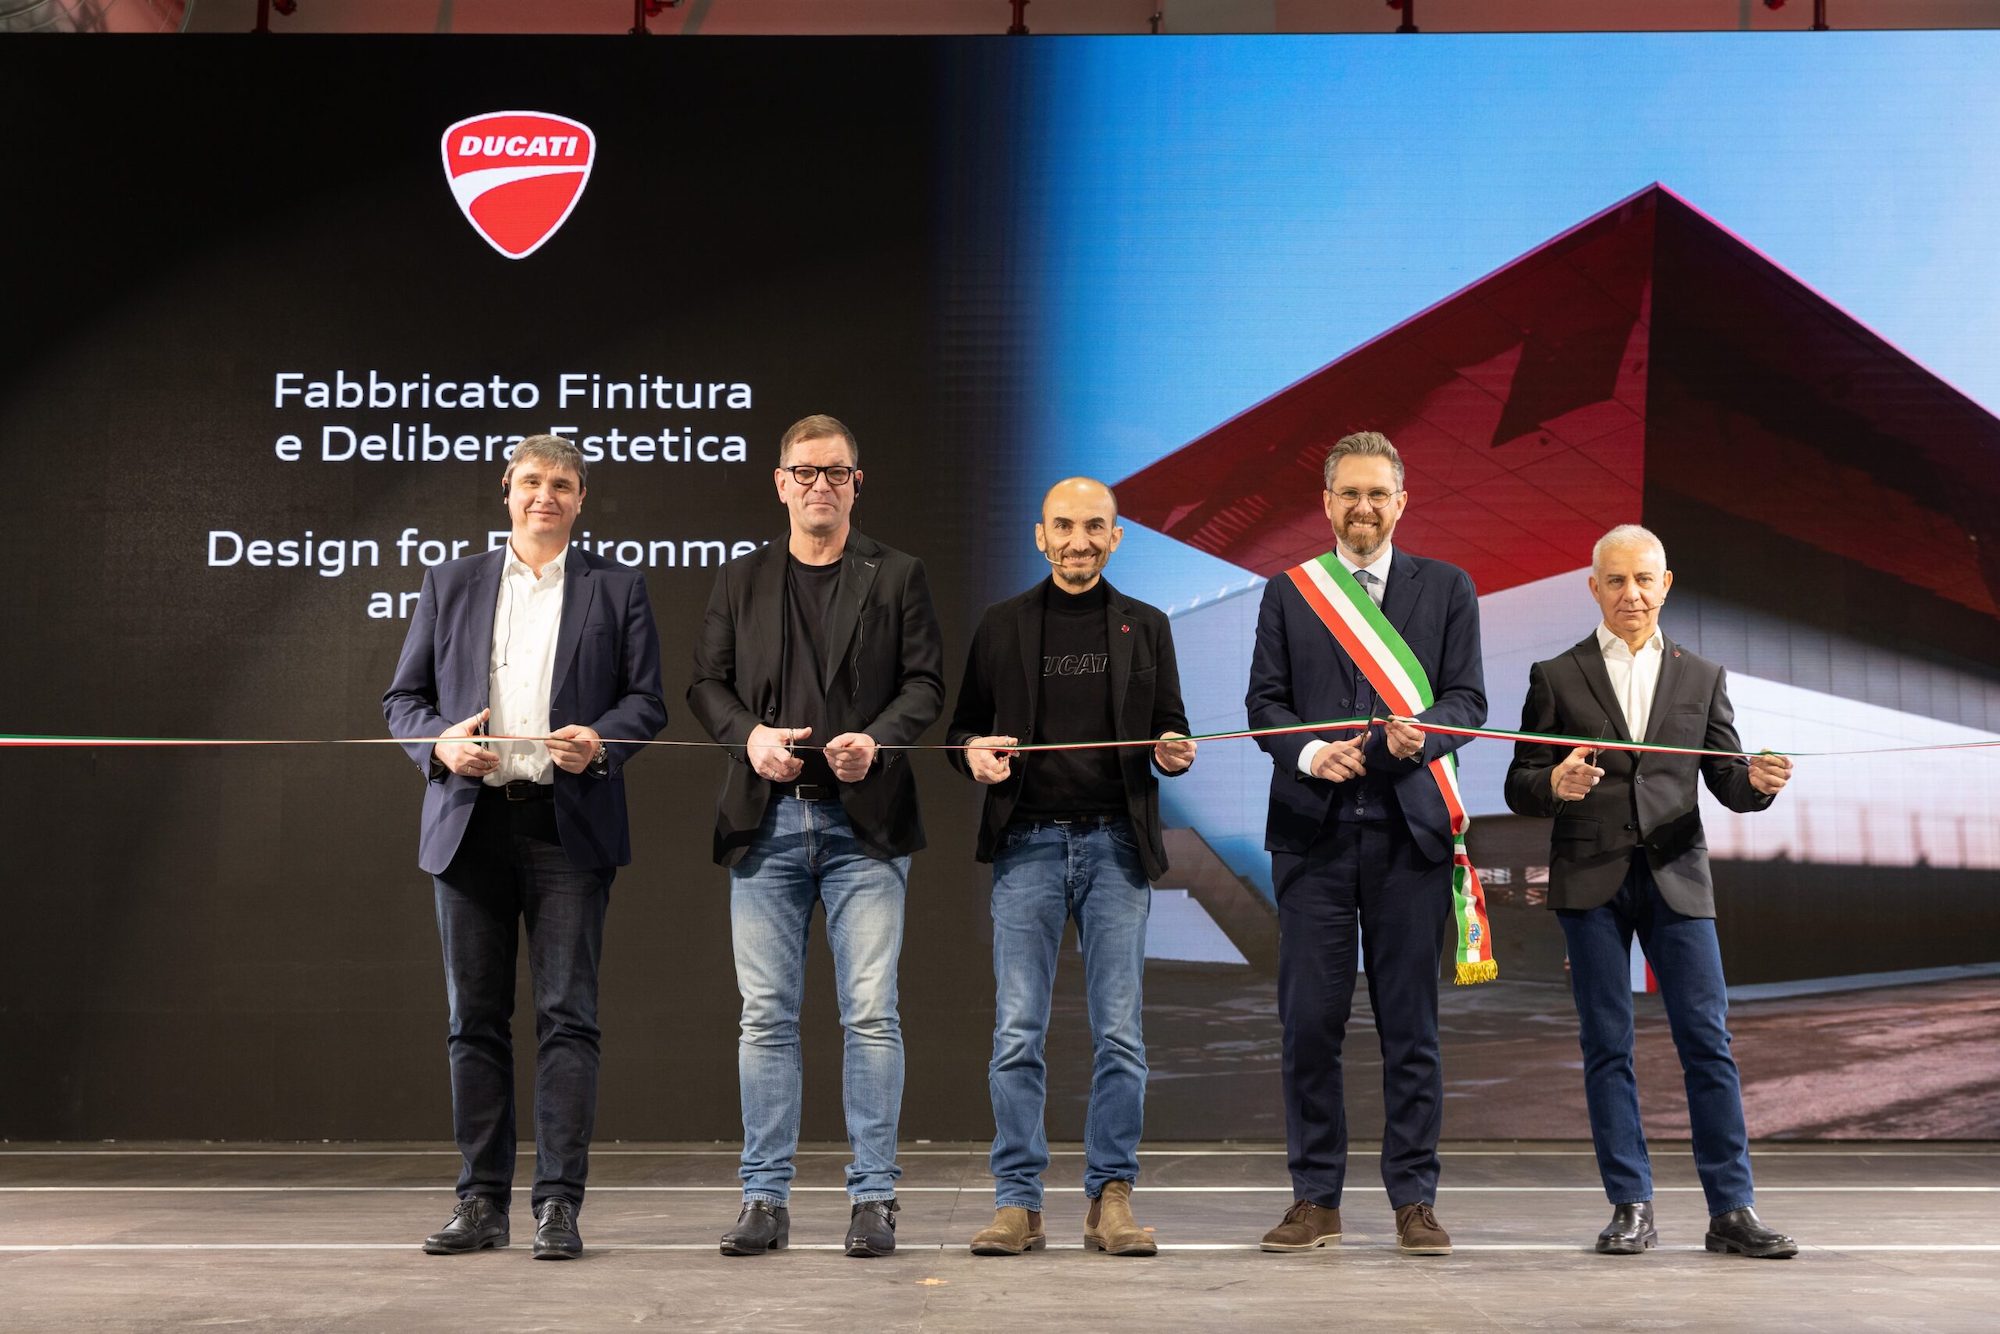 Claudio Domenicali next to Bologna's mayor and other relevant persons of importance at Ducati's all-new eco-friendly building, the Finitura e Delibera Estetica. Media sourced from Motosan.